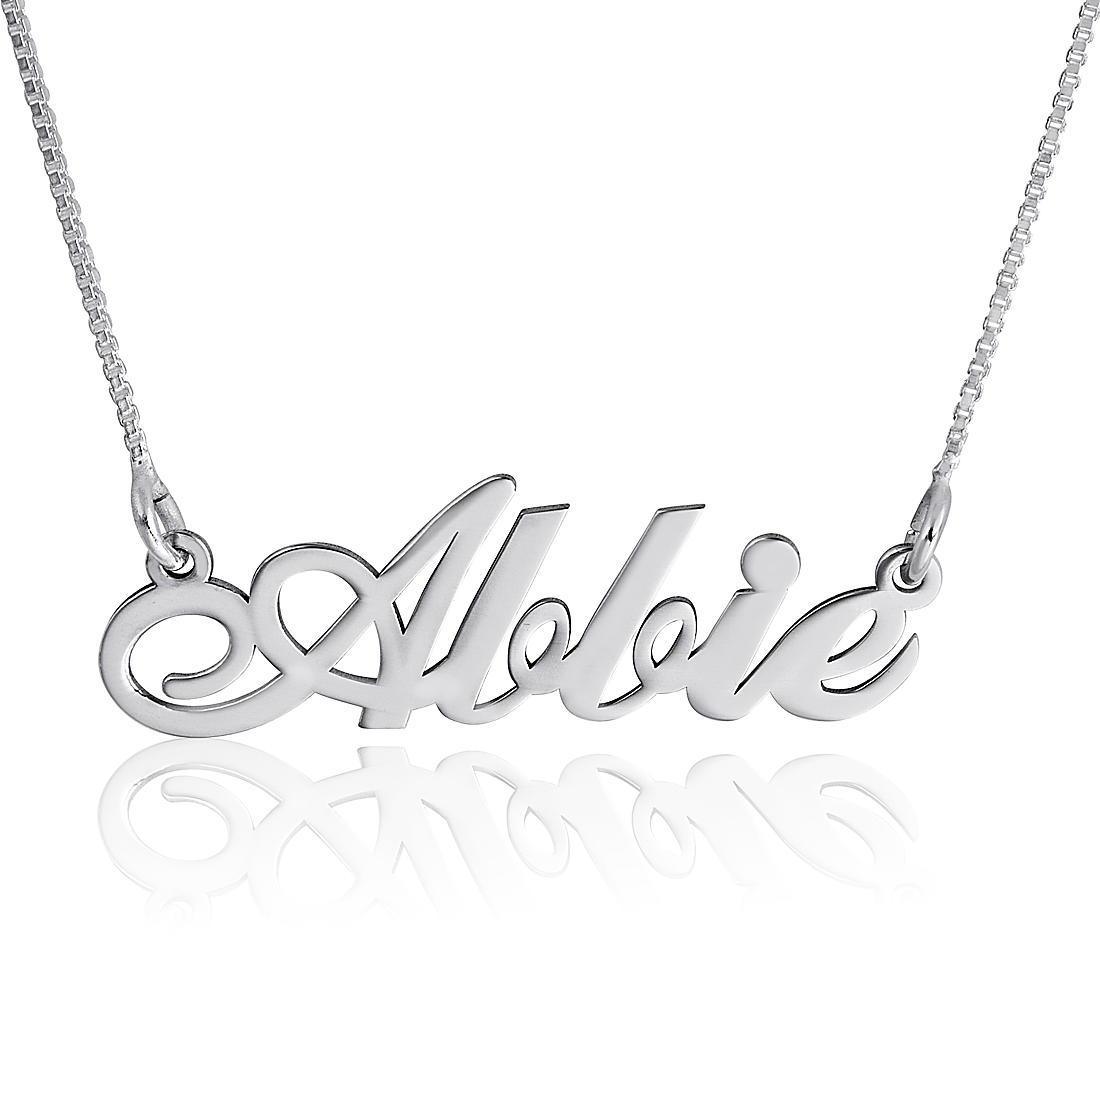 New Script Name Necklace, Silver - 1